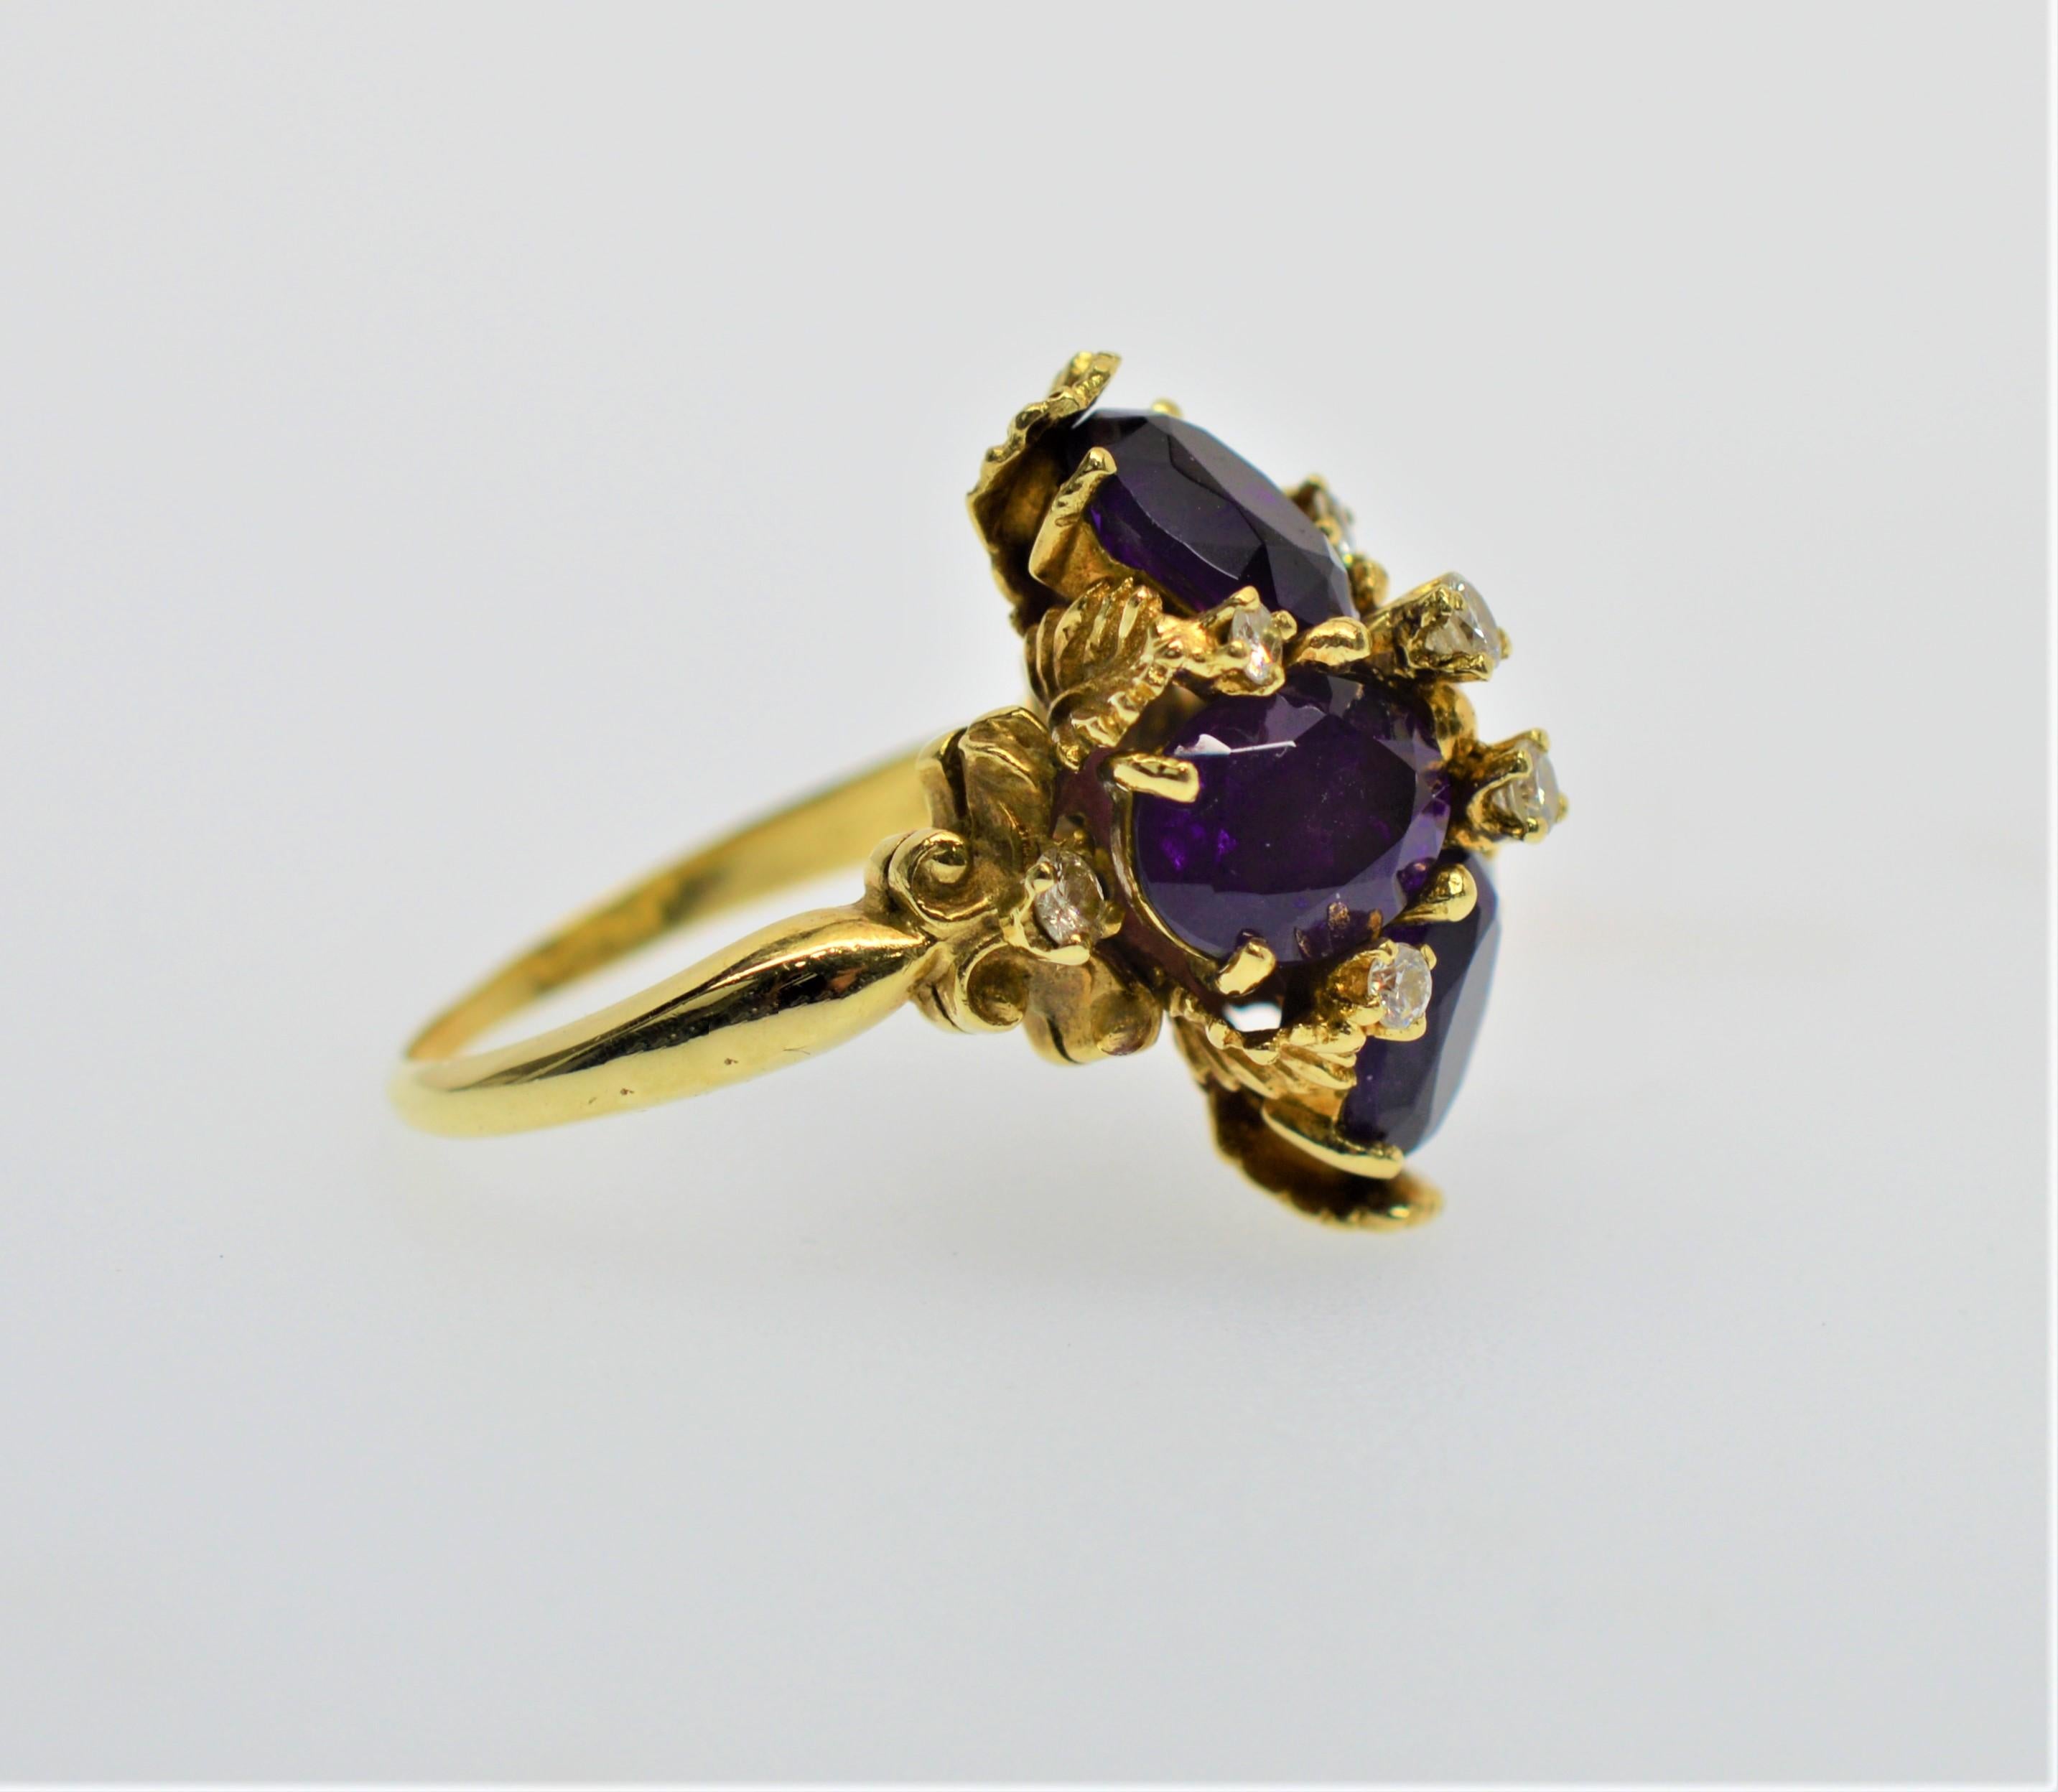 Four fabulous large faucet-cut oval genuine amethyst stones dressed with eight .01 carat diamonds present beautifully in this expertly crafted 14 karat yellow gold ladies cocktail ring. Bright 14 karat yellow gold leaves artfully frame the four deep